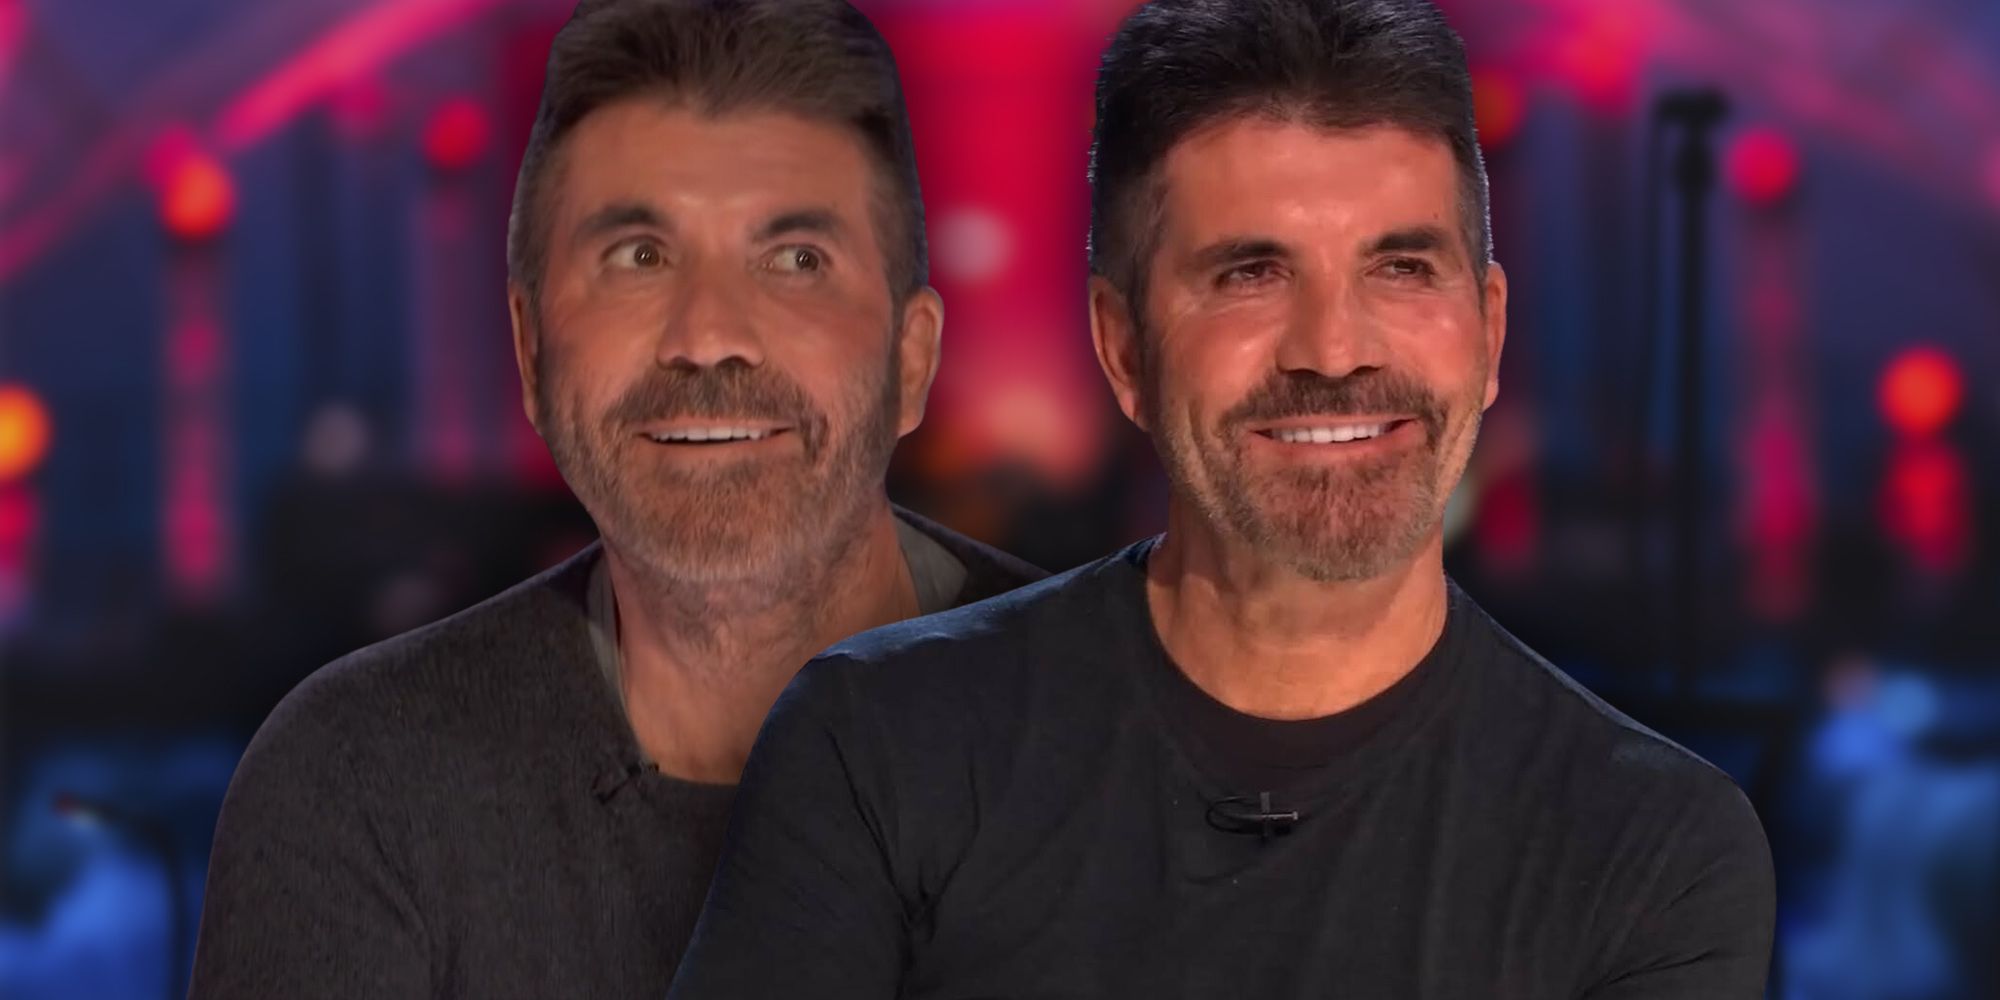 Simon Cowell American Idol montage two images of Simon dark background with red accents